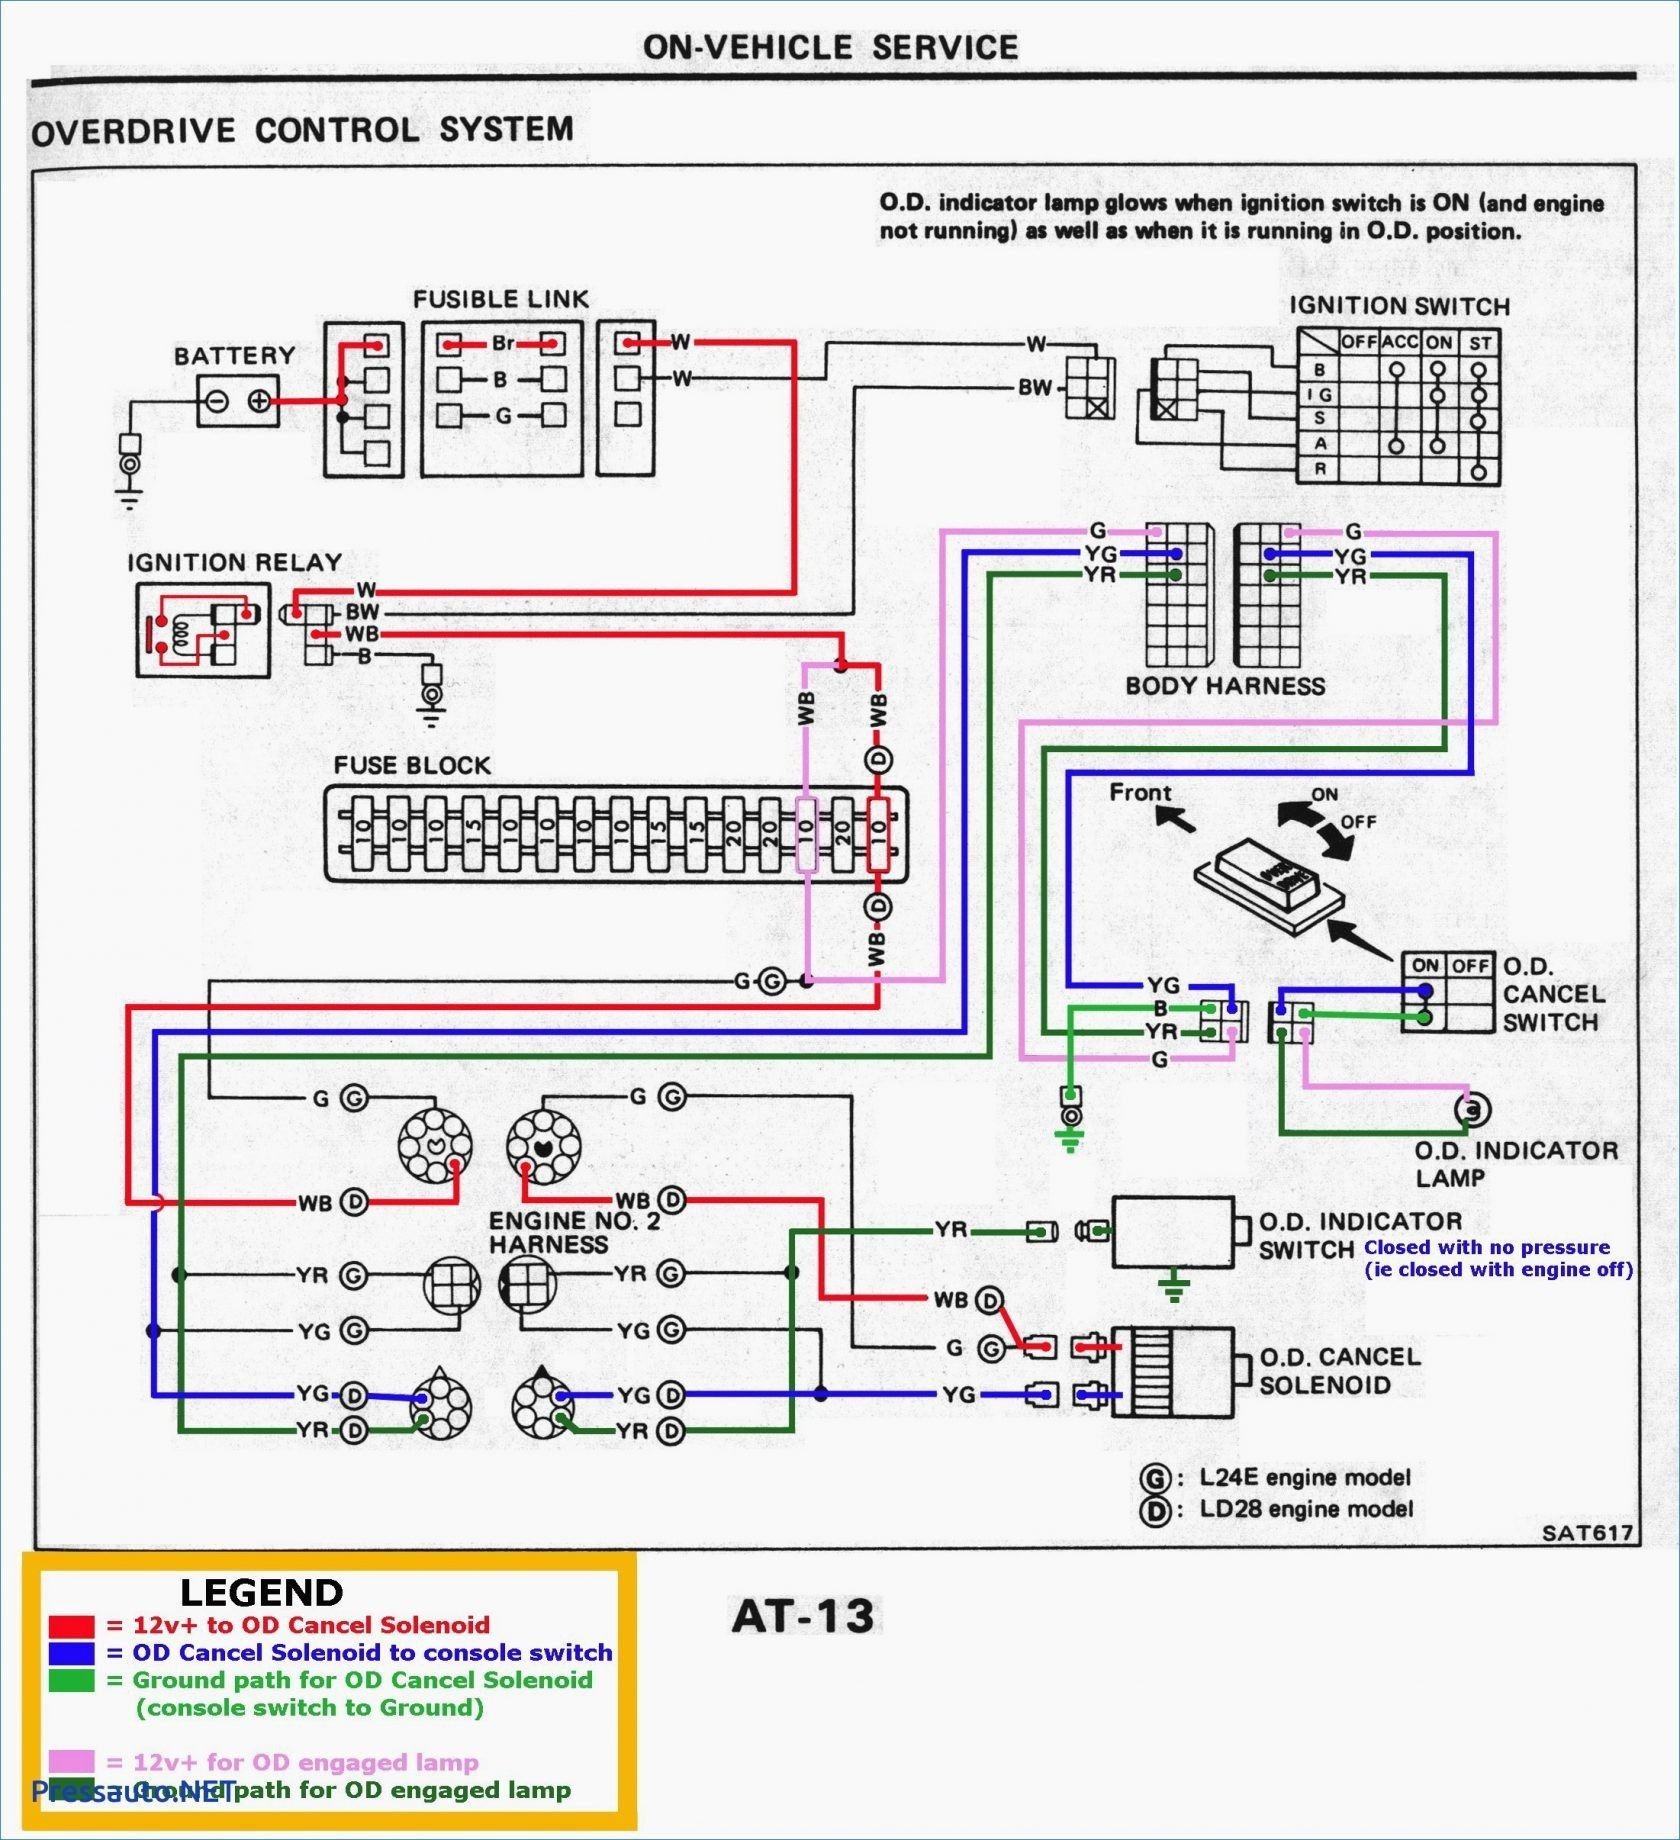 1996 ford Ranger Parts Diagram ford Ranger Power Window Wiring Color Codes Wiring Diagram Used Of 1996 ford Ranger Parts Diagram